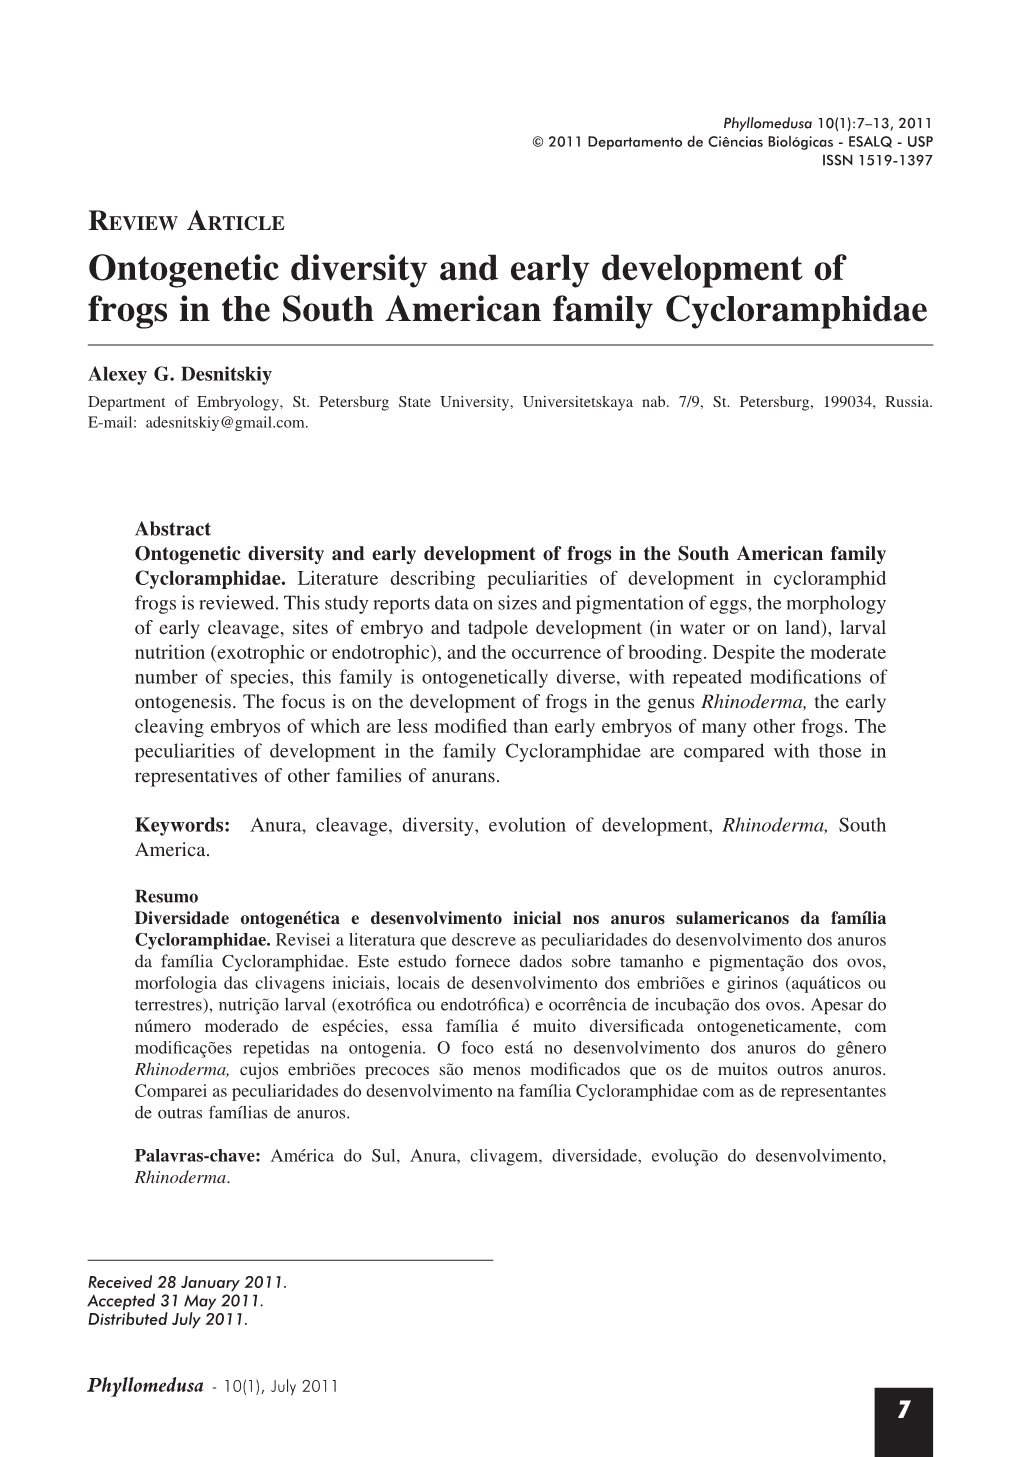 Ontogenetic Diversity and Early Development of Frogs in the South American Family Cycloramphidae